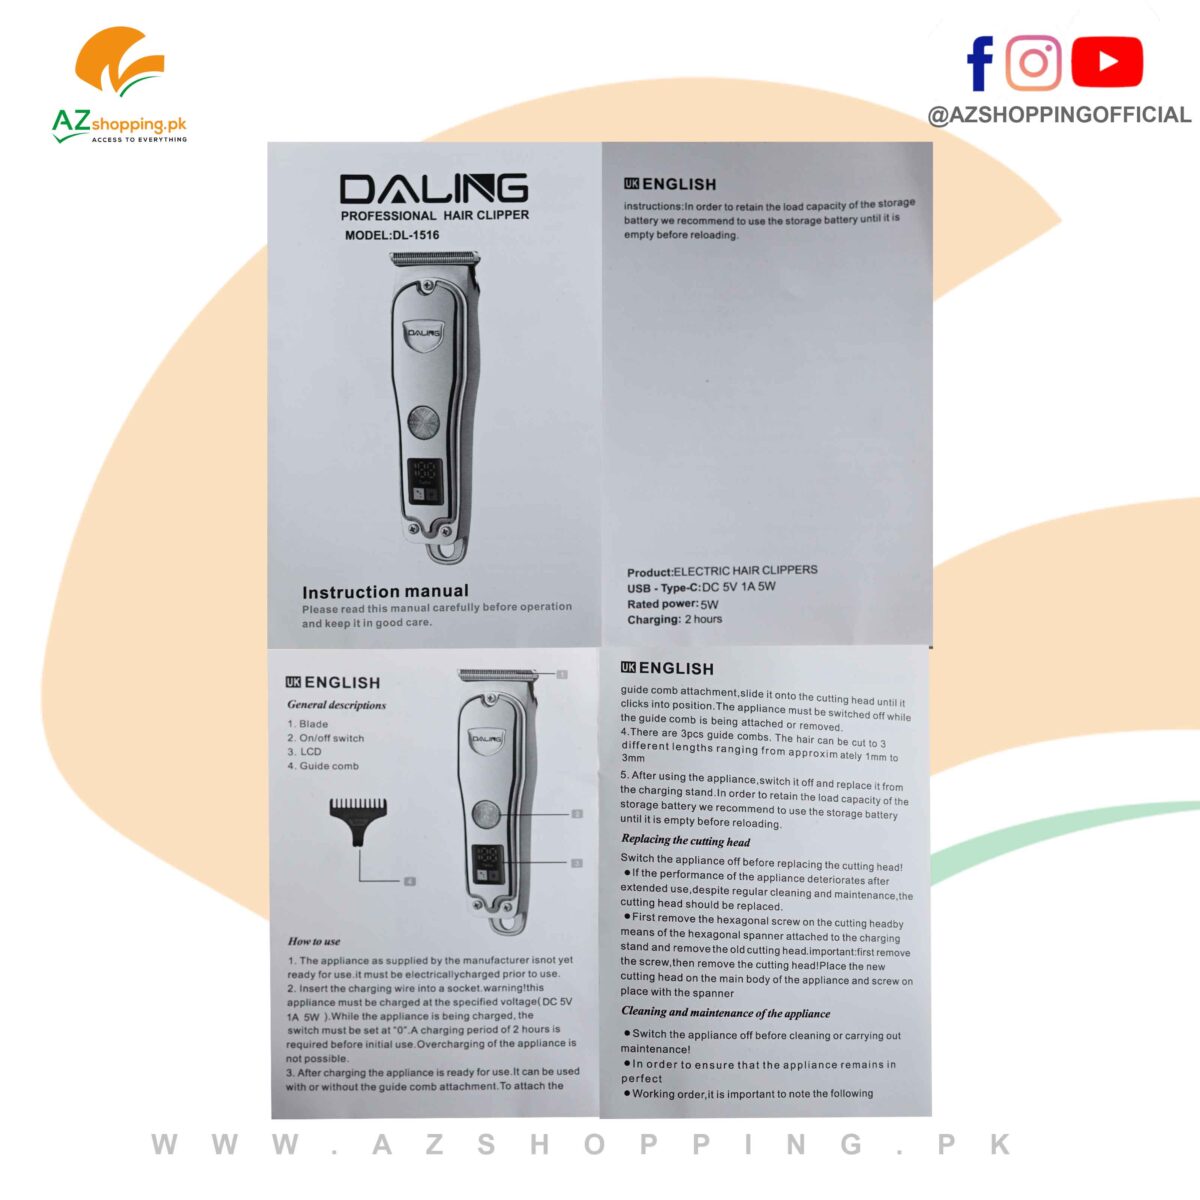 Daling - Professional Stainless Steel Electric Hair Clipper, Trimmer, Shaver & Shaving Machine with High-Performance T-Blade, LCD Display, ON/OFF Button, Intelligent induction Anti-pinch System – Model: DL-1516